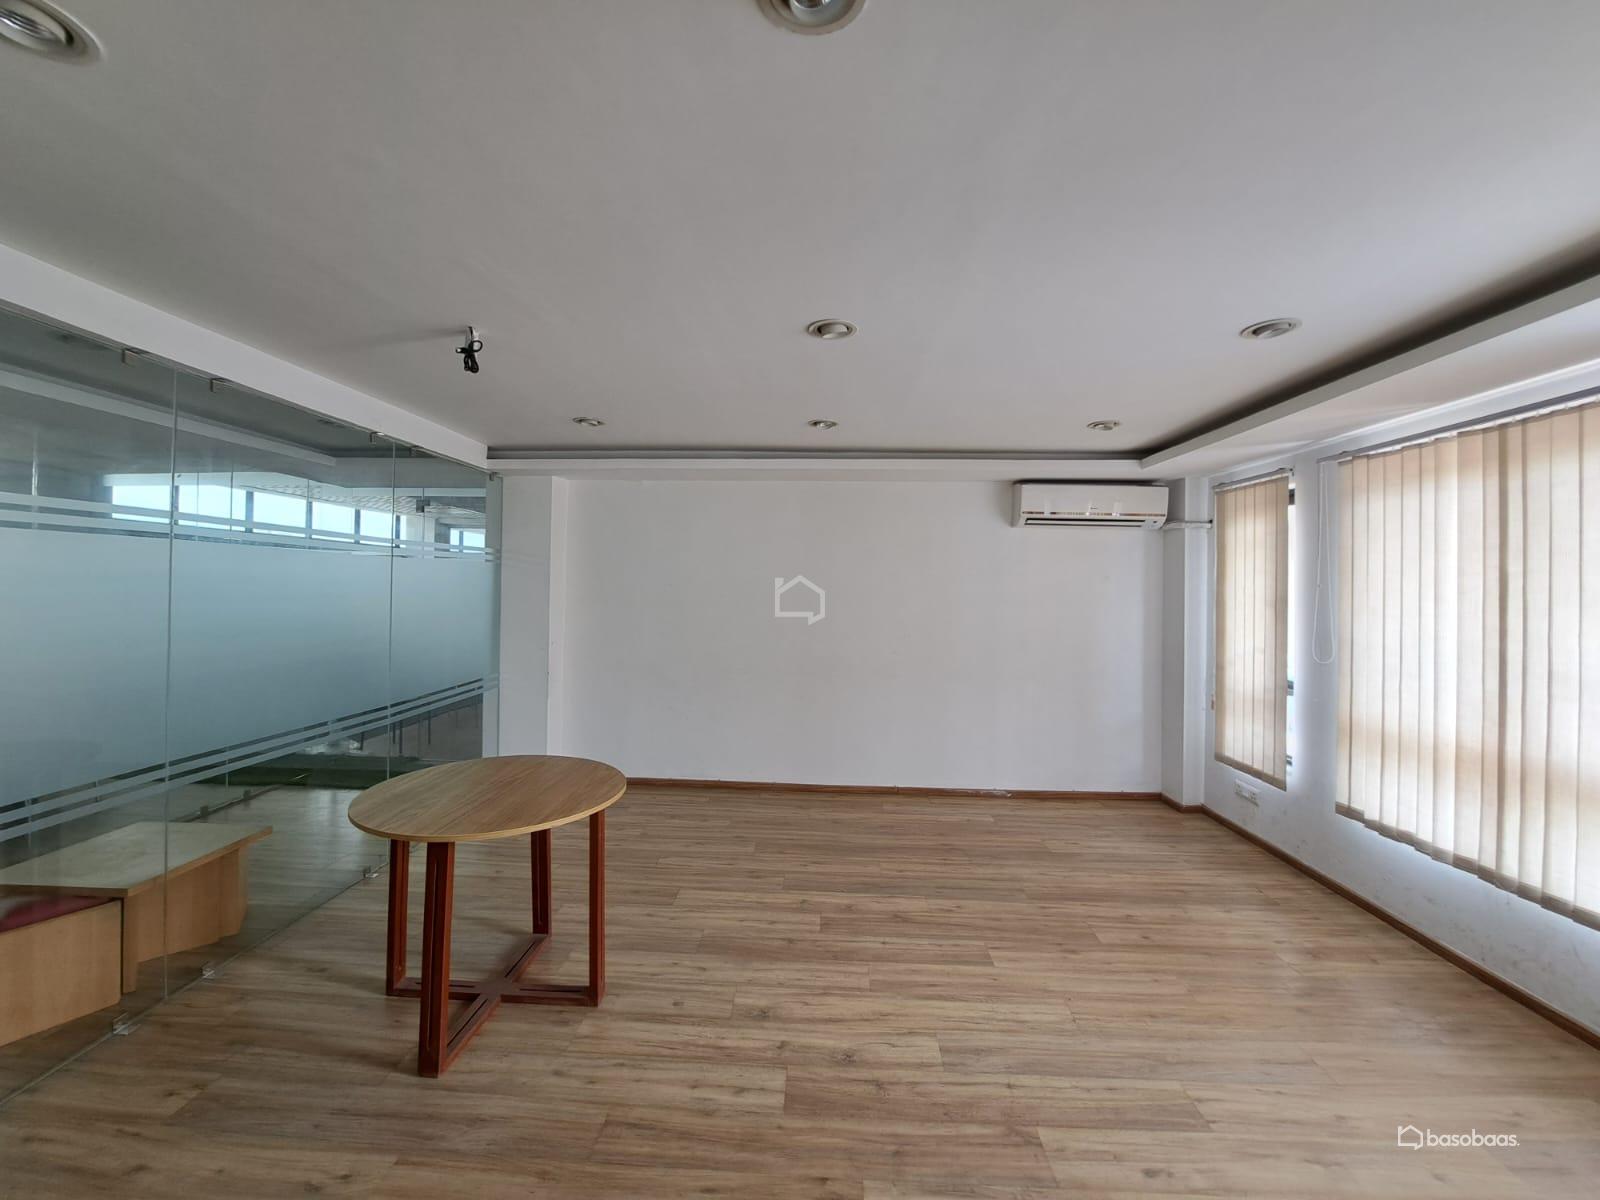 COMMERCIAL : Office Space for Rent in Baneshwor, Kathmandu Image 6